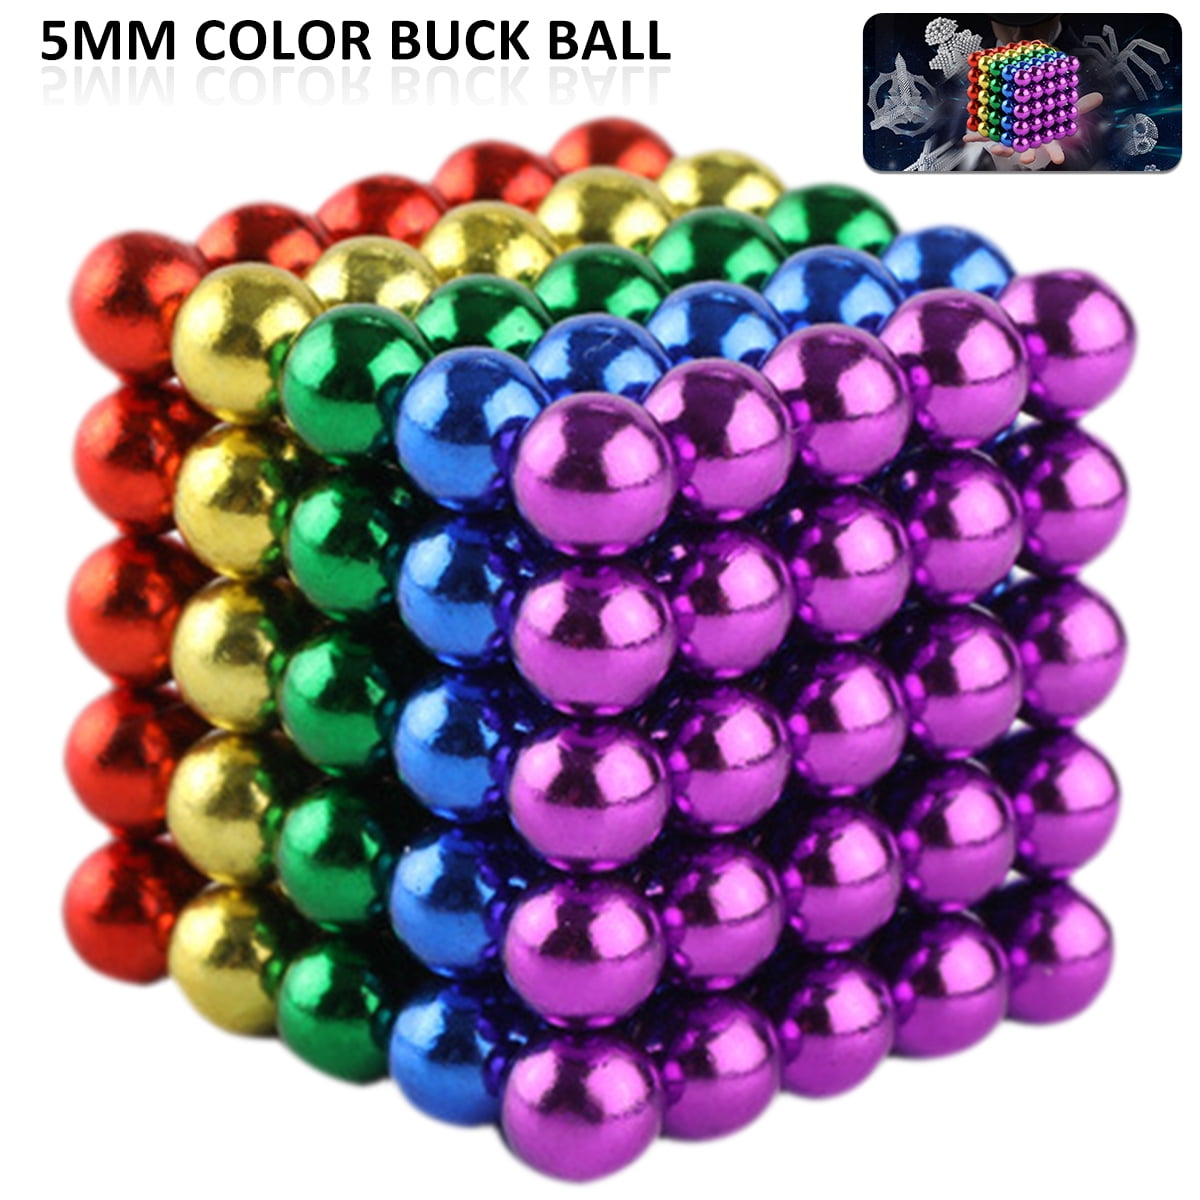 Sky Magnets 5 mm Magnetic Balls Cube Fidget Gadget Toys Rare Earth Magnet Office Desk Toy Games Magnet Toys Multicolor Beads Stress Relief Toys for Adults 8 Colors 